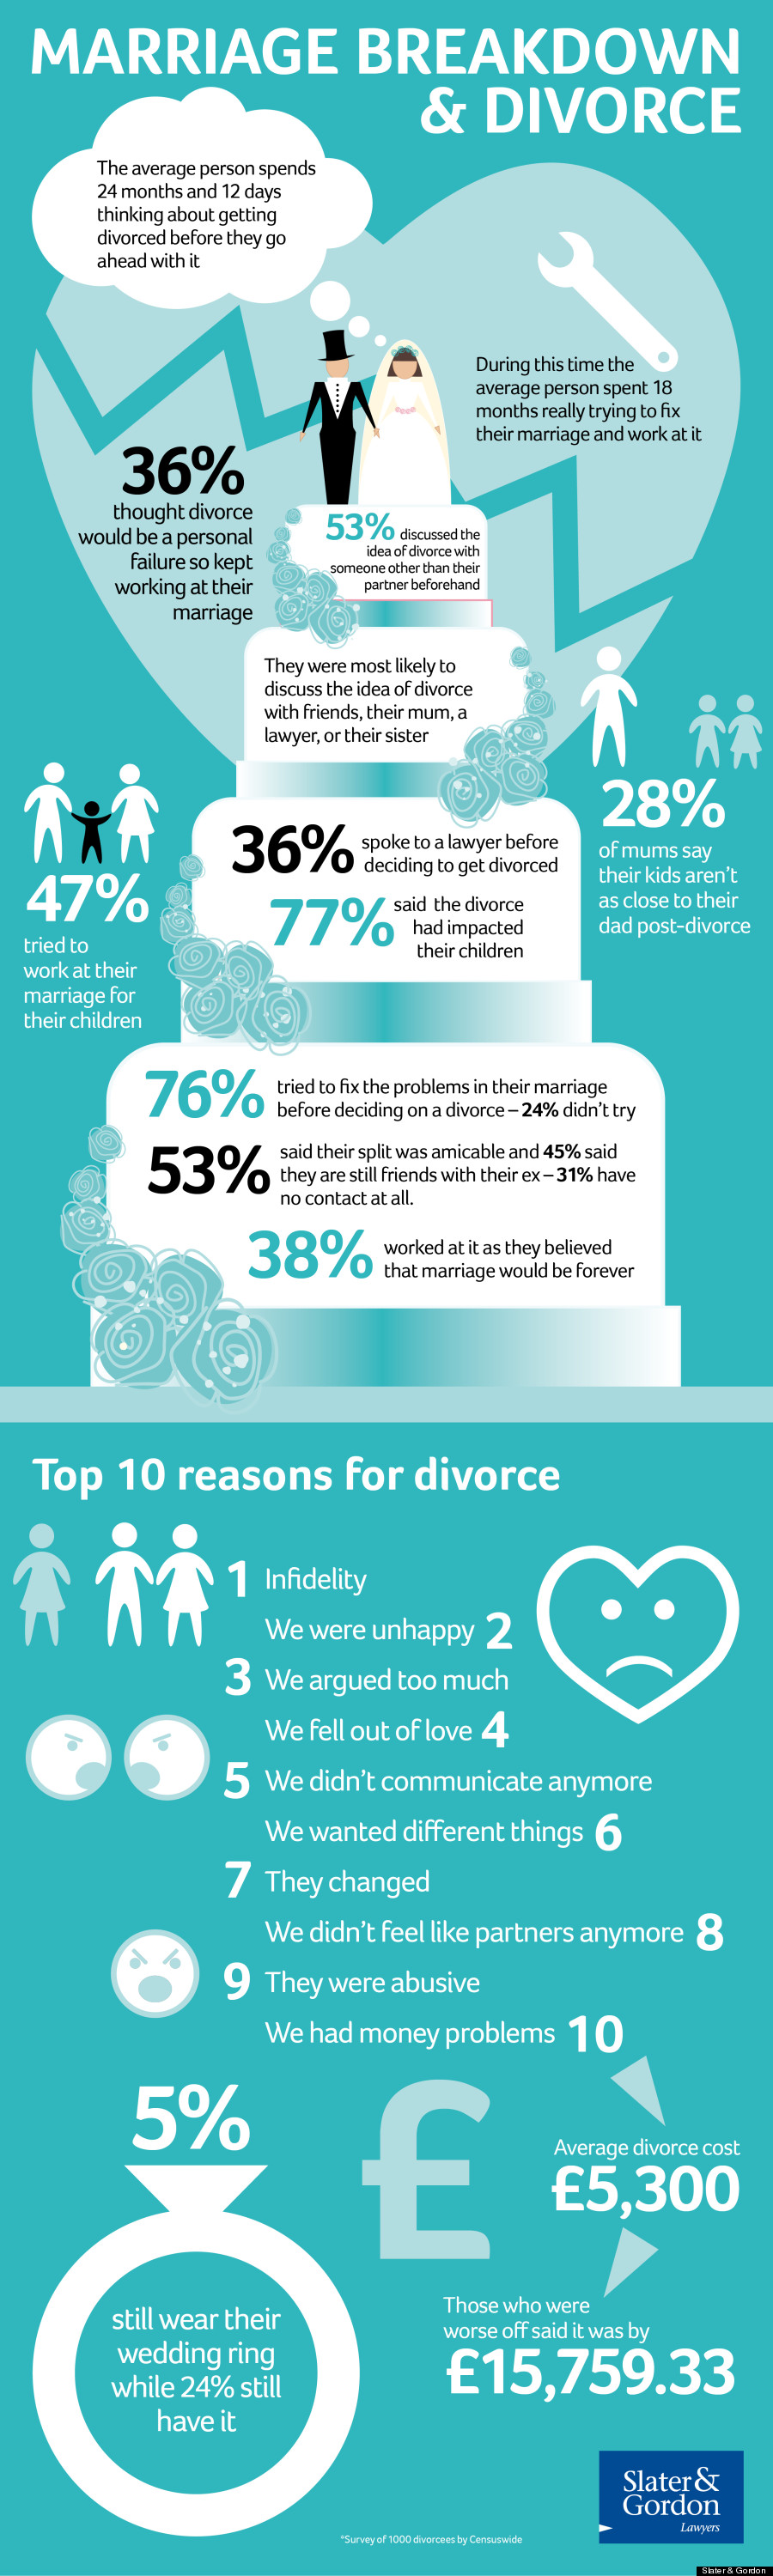 What are the top 10 reasons for divorce